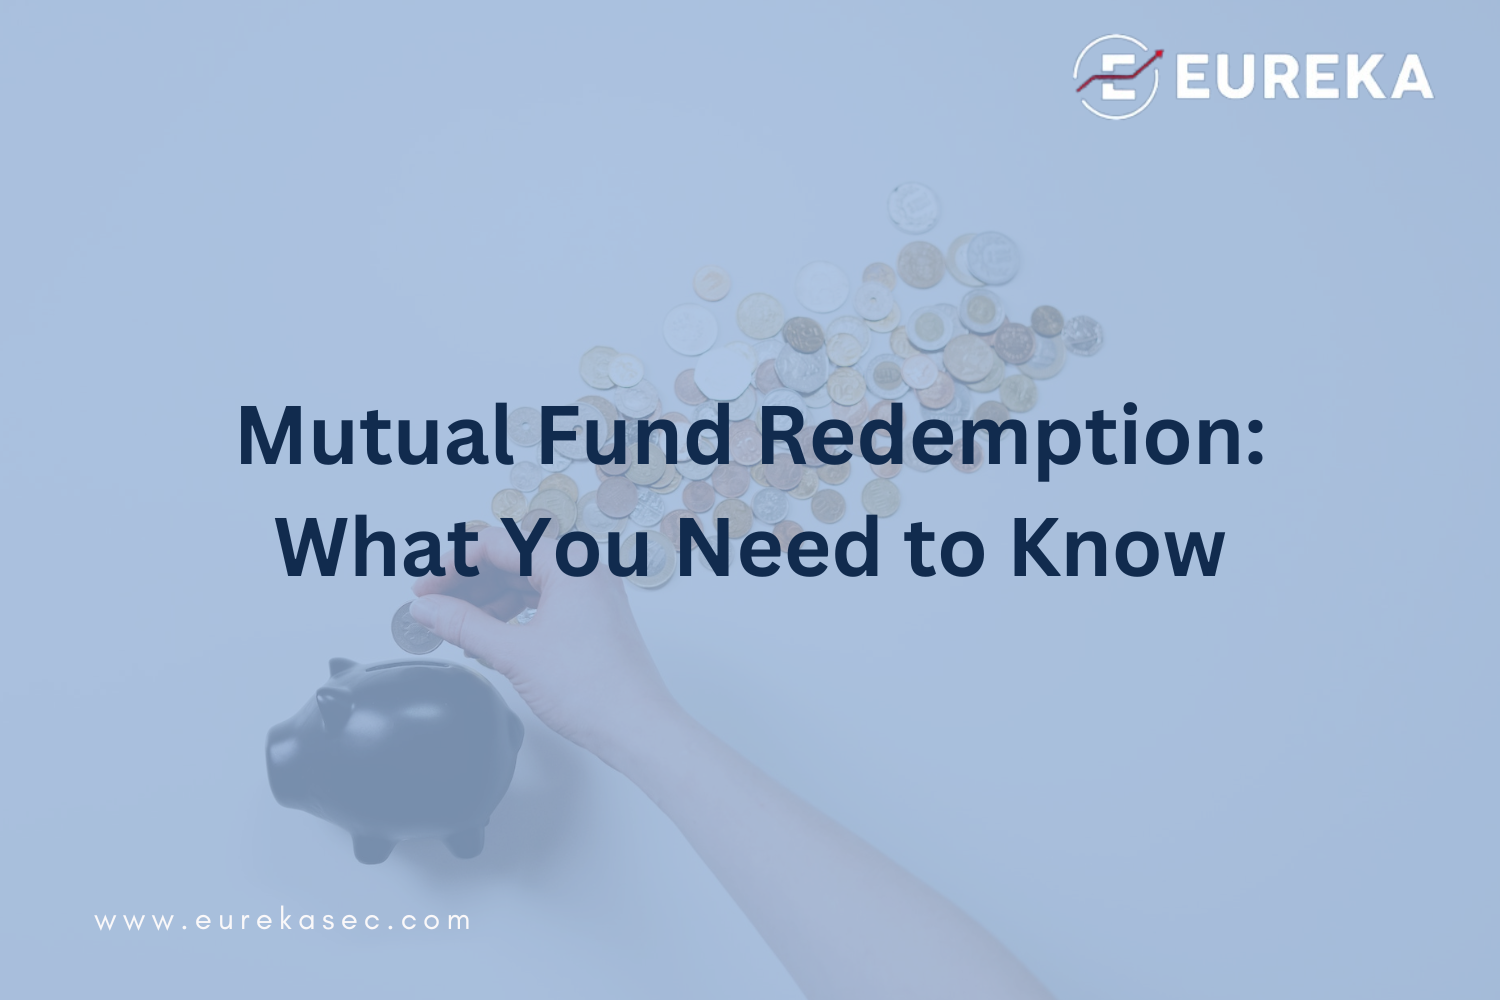 Mutual Fund Redemption: What You Need to Know